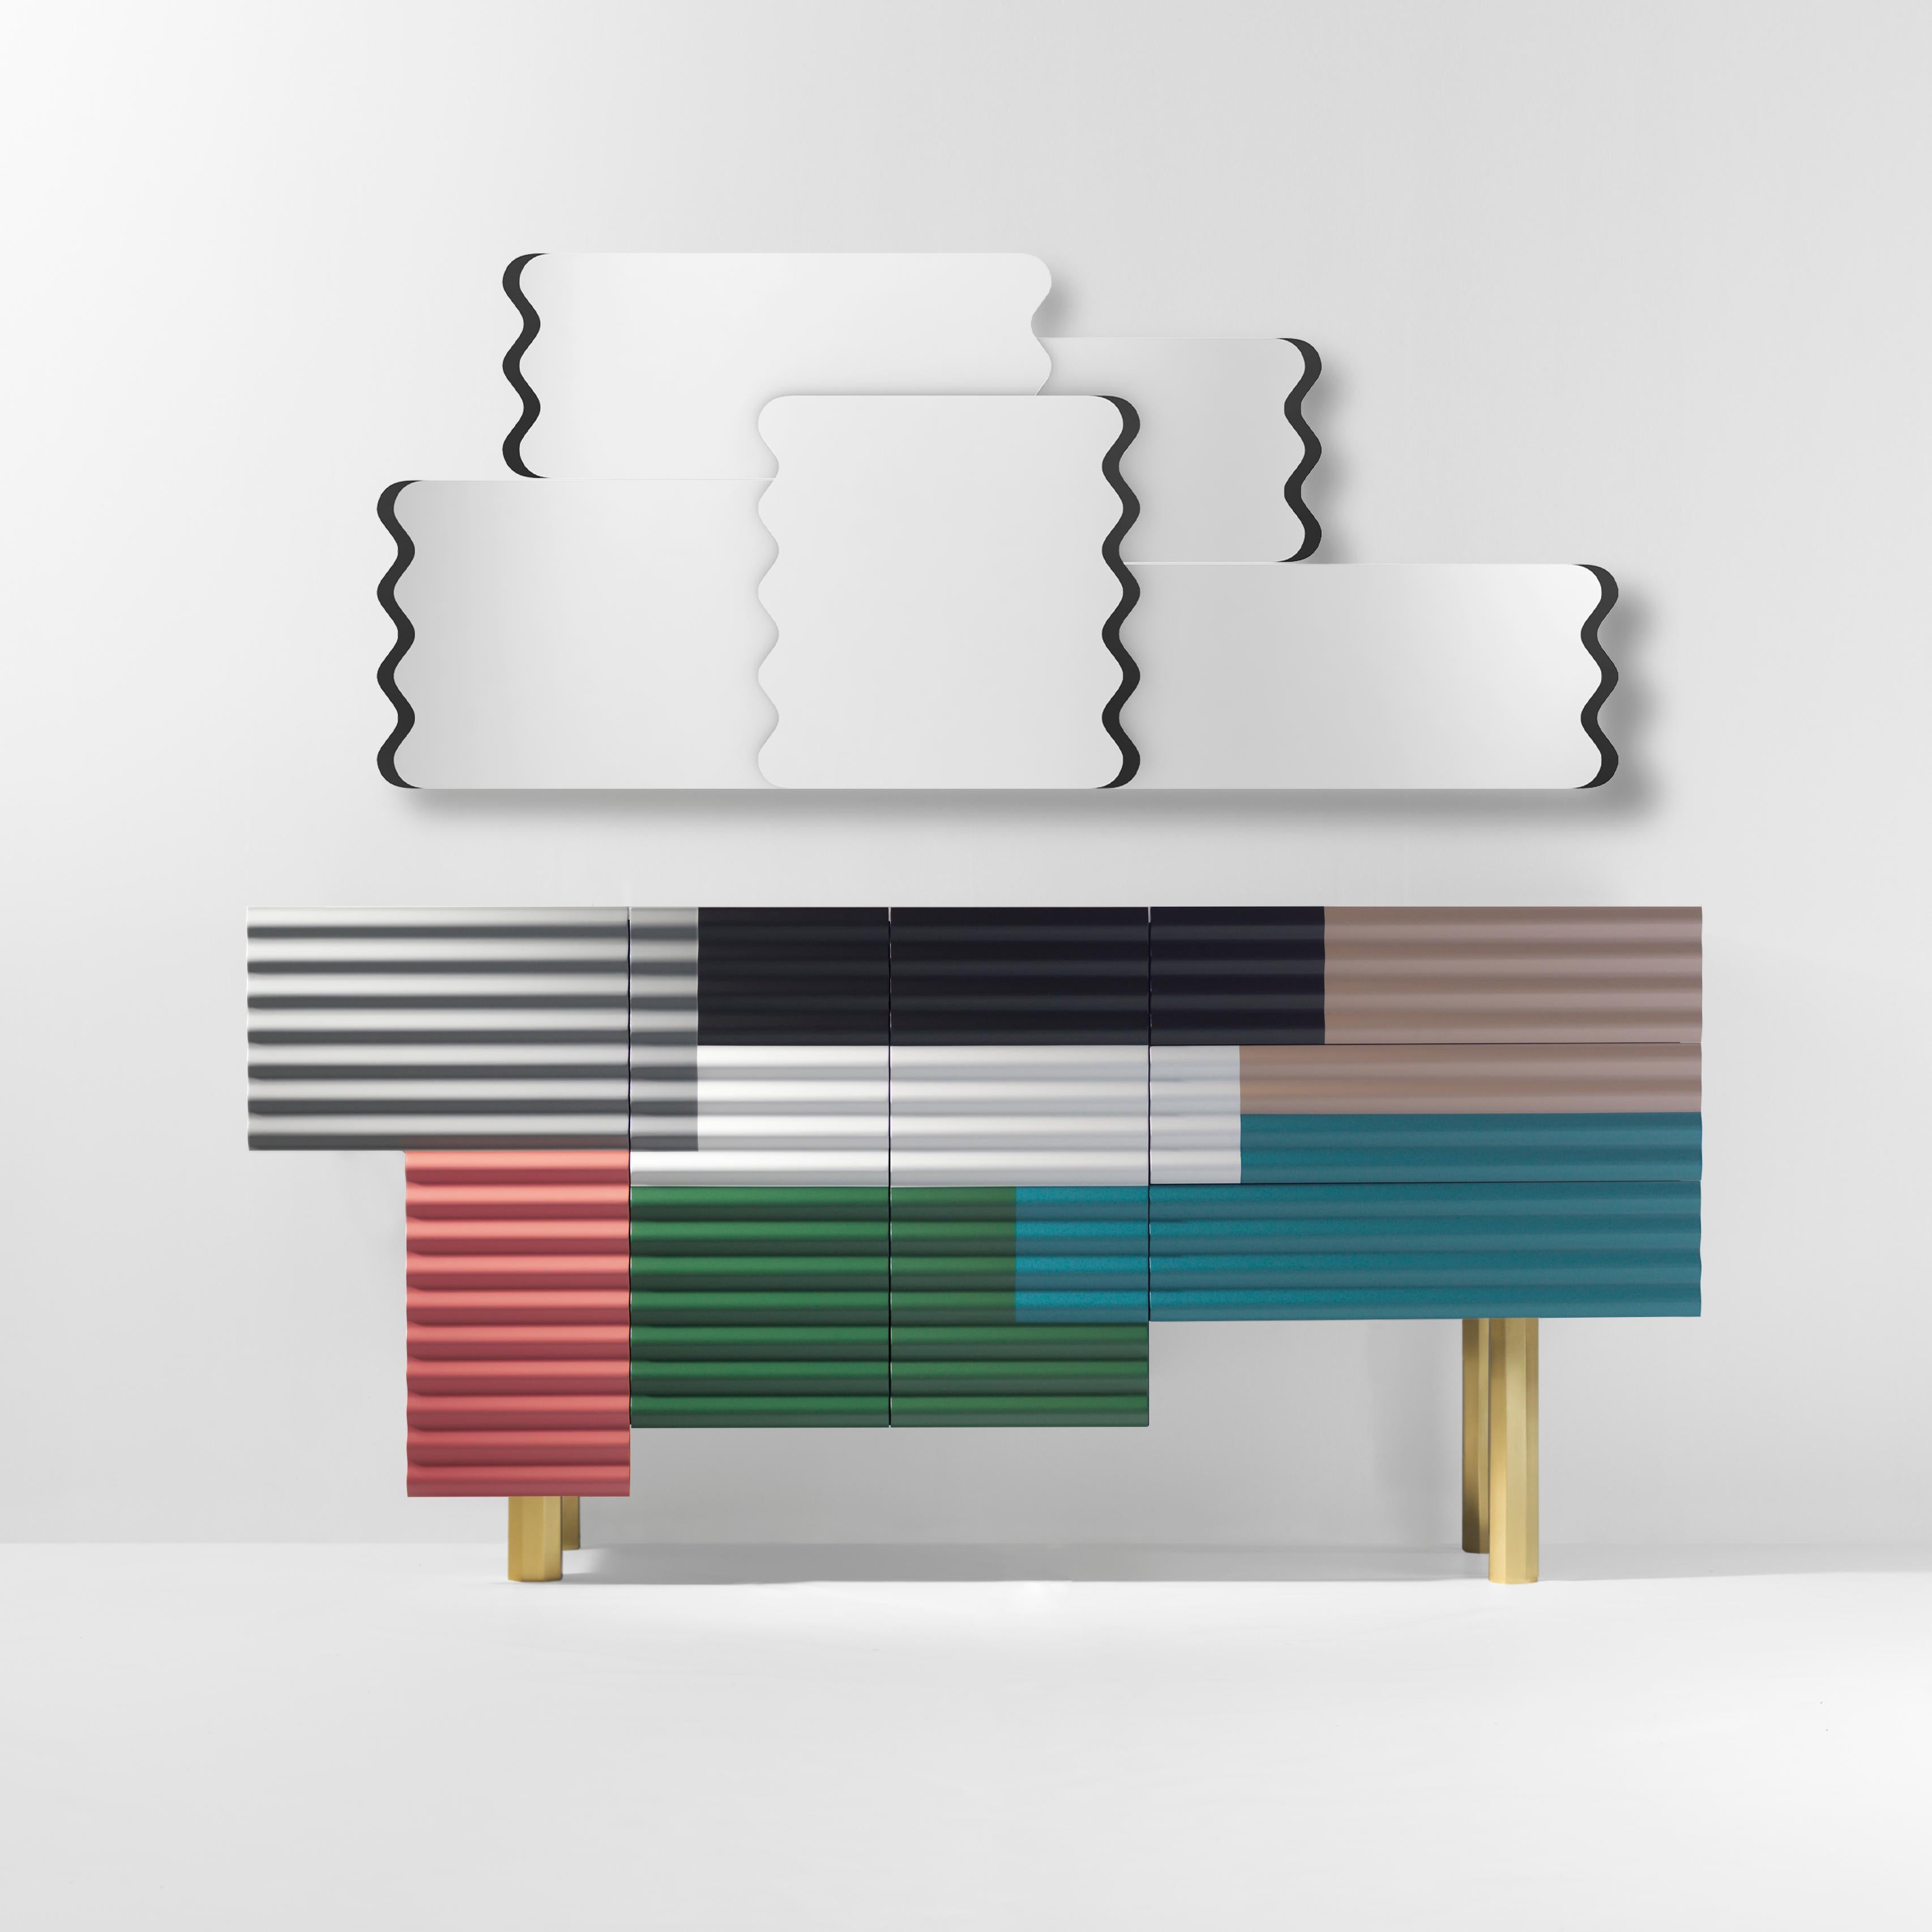 Shanty cabinet designed by Doshi Levien in 2014 manufactured in Barcelona by BD.

Shanty is inspired in the patchwork of corrugated steel sheets which are used to construct many temporary or provisional homes, which exist in the whole world. Its